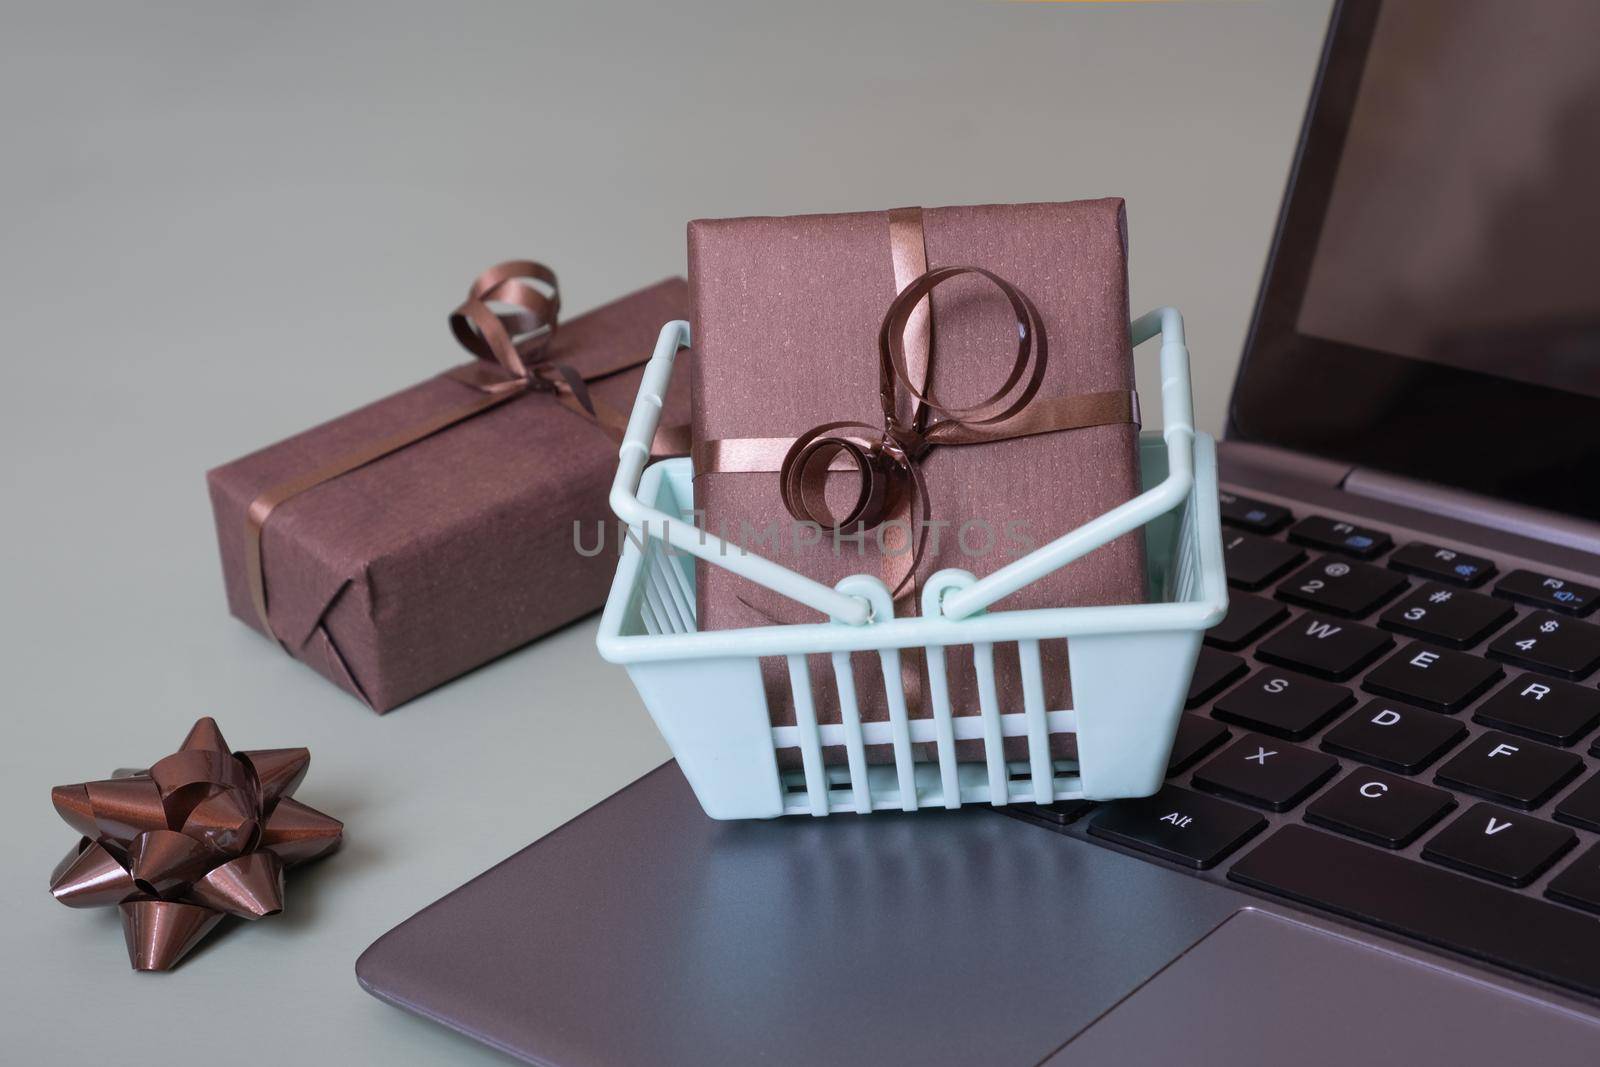 Wrapped gifts in shopping baskets on laptop. Online shopping concept by ssvimaliss